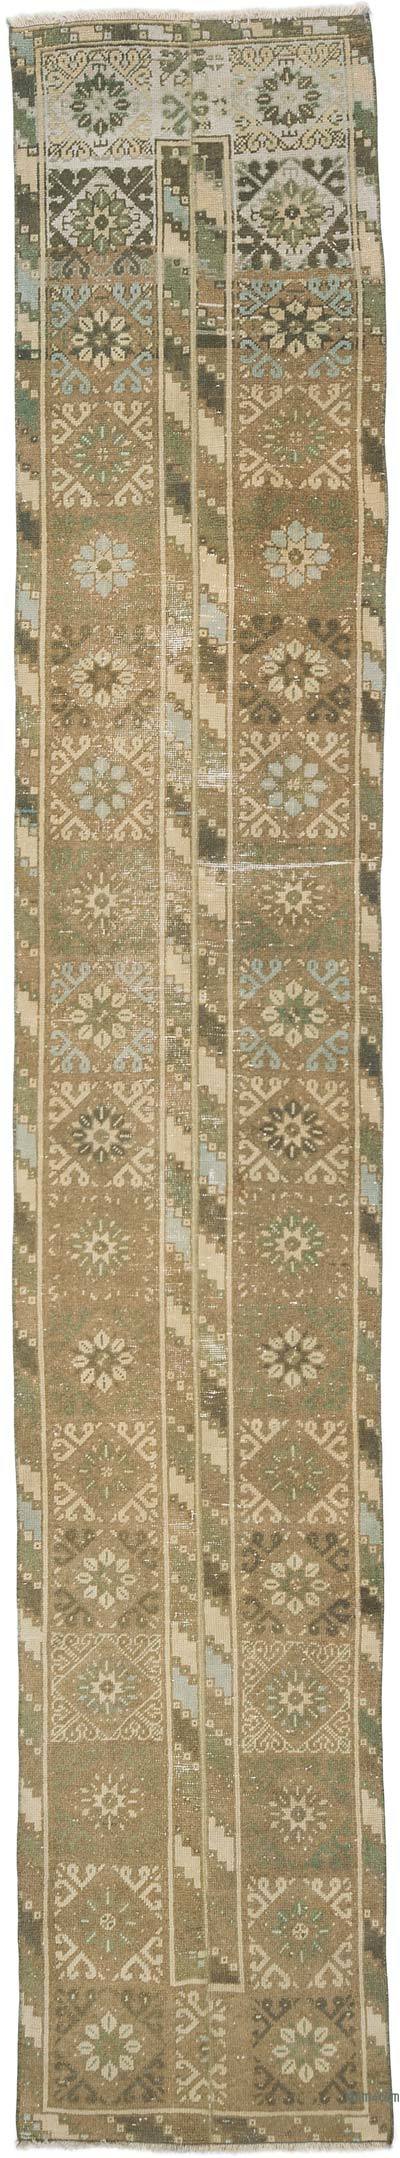 Vintage Turkish Hand-Knotted Runner - 2' 4" x 12' 9" (28 in. x 153 in.)